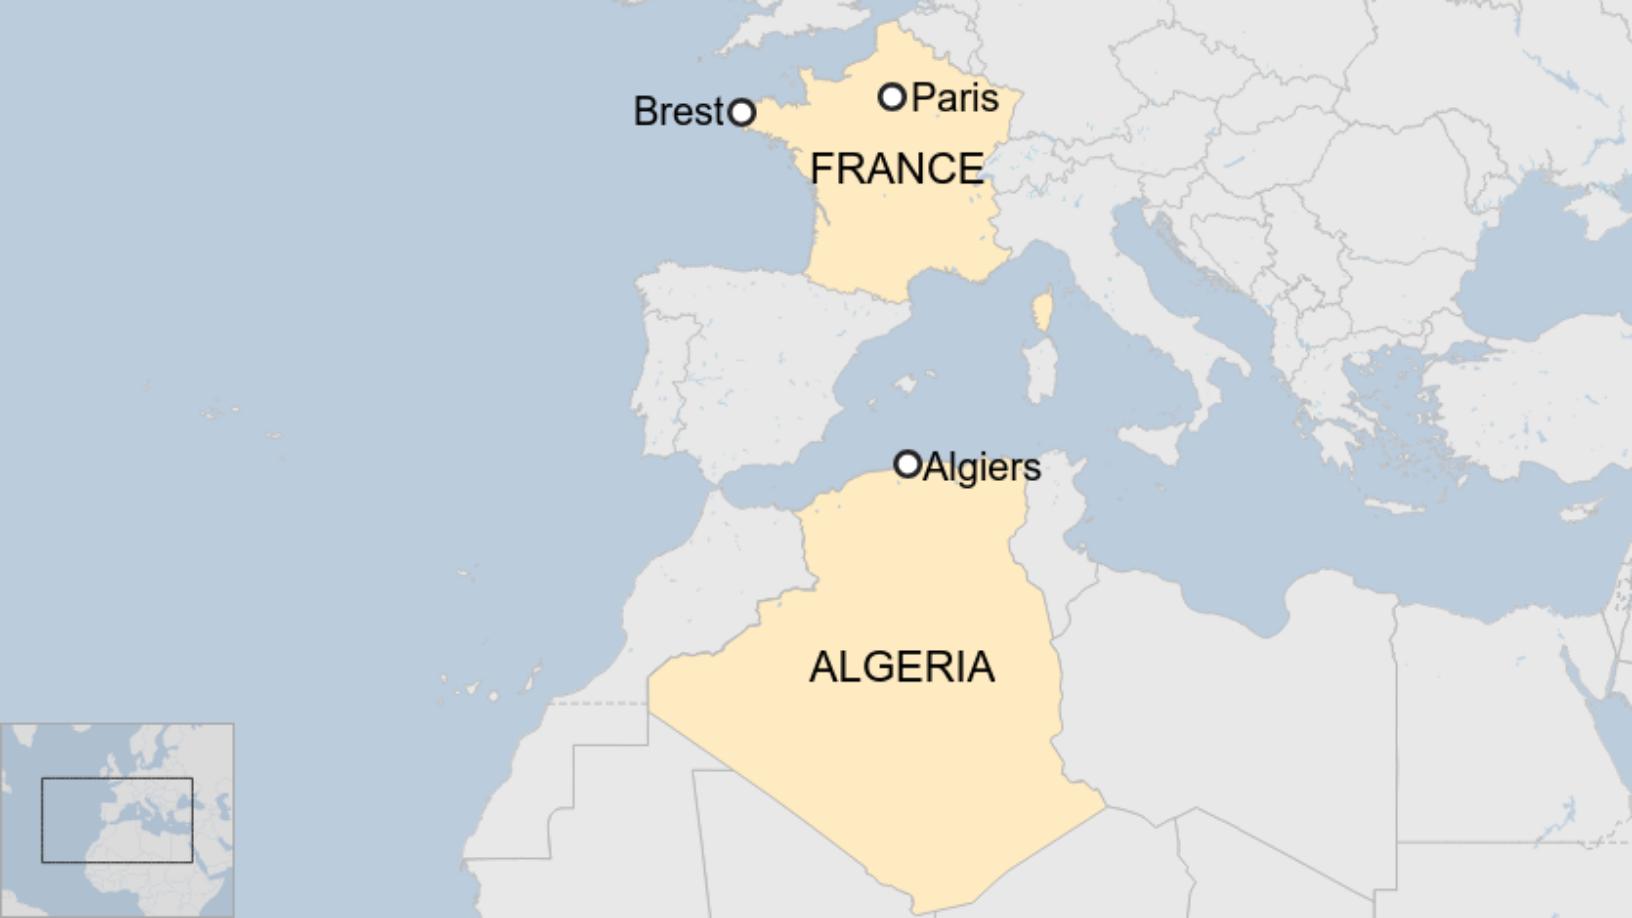 Map: Algeria and France